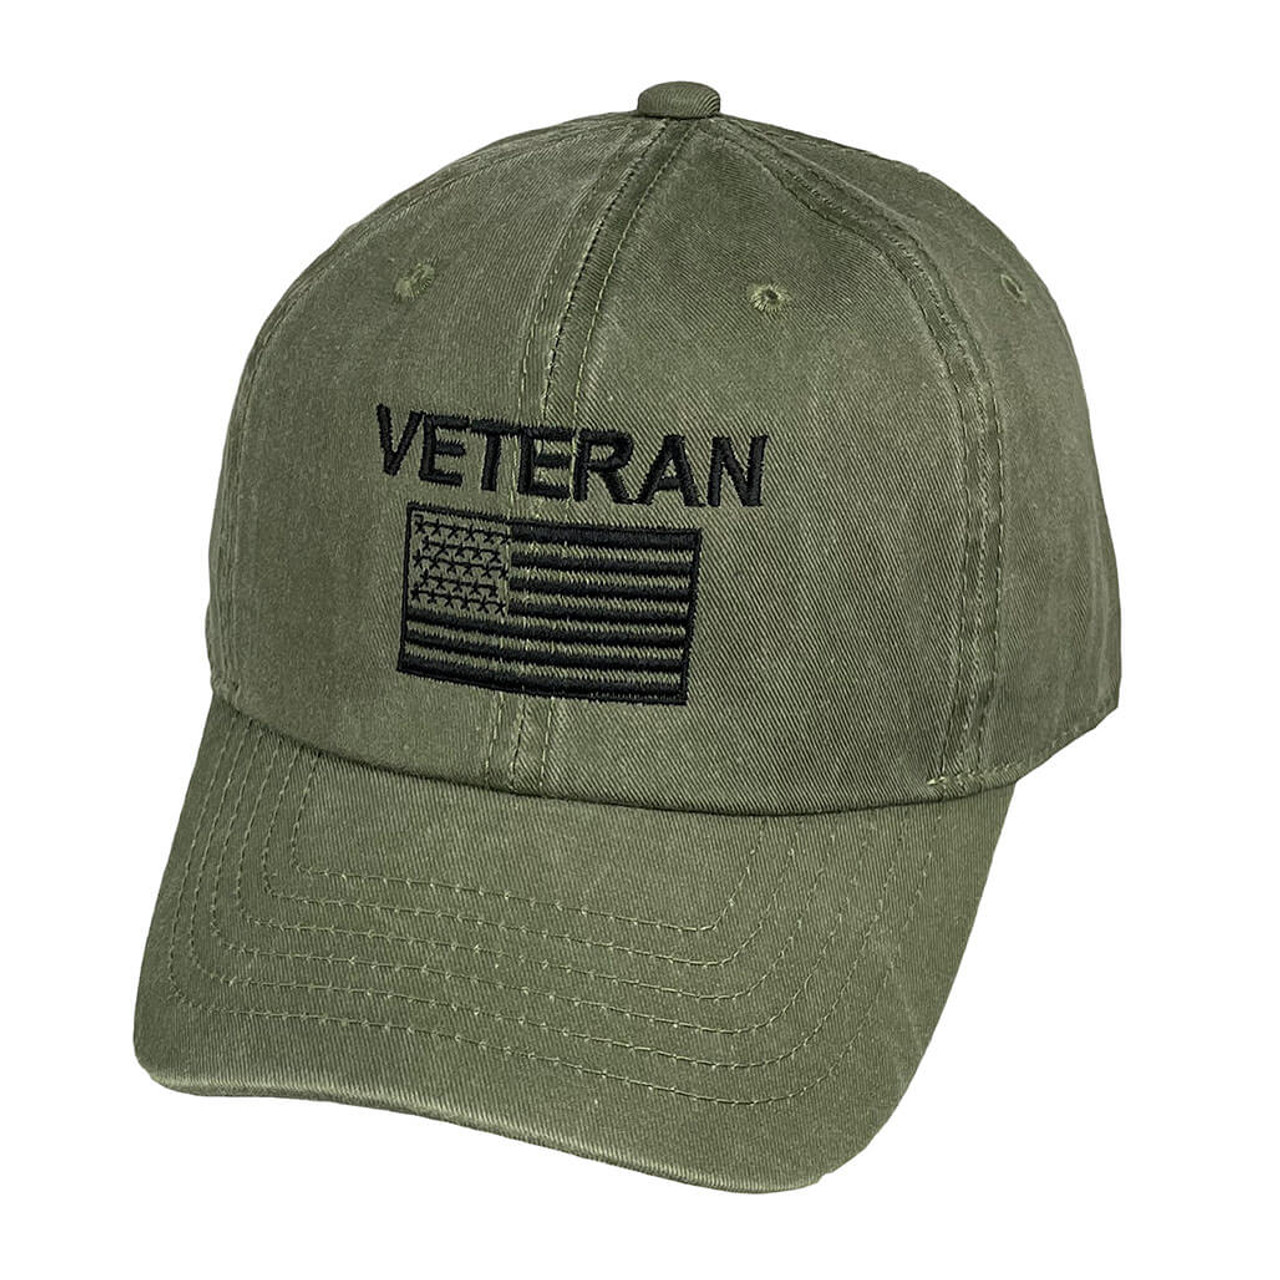 US Veteran Hat with Embroidered US Flag - Olive Drab